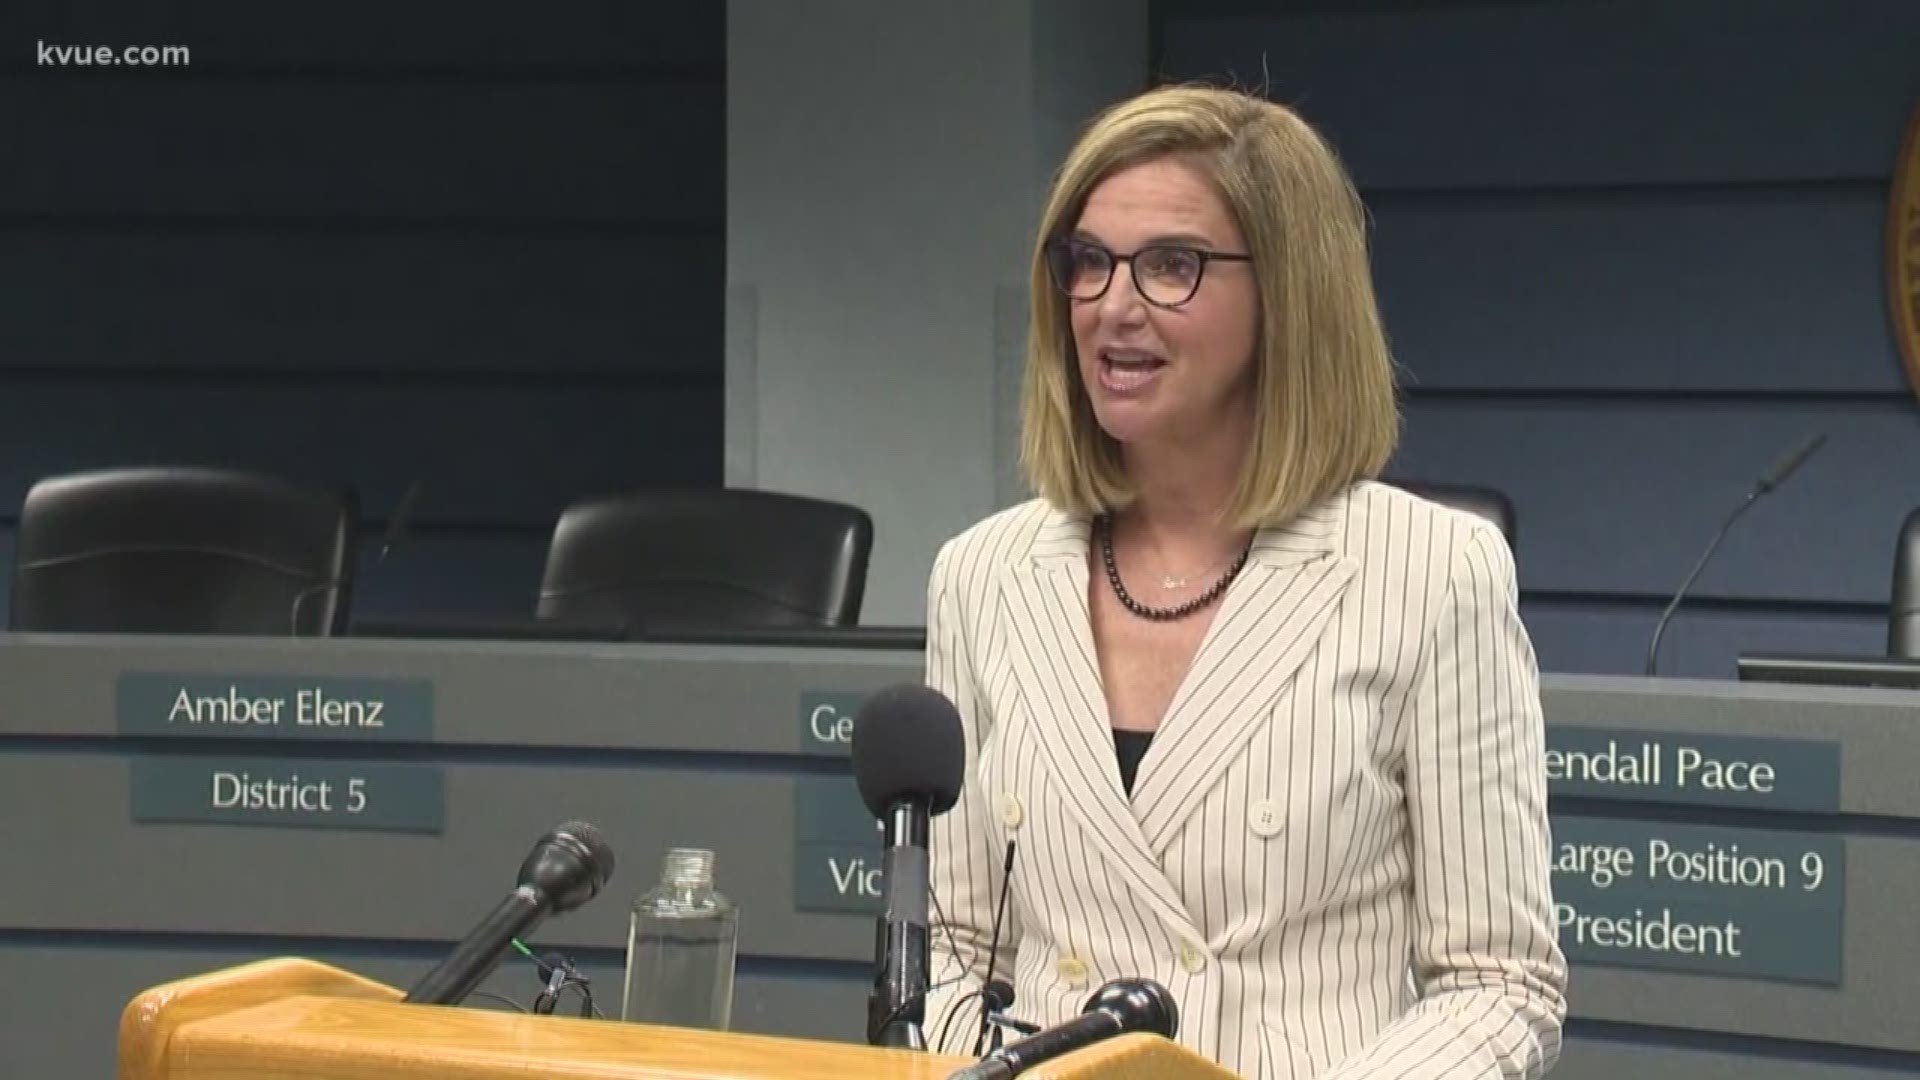 Austin Independent School District Board of Trustees President Kendall Pace announced she is resigning from the board during a press conference Monday morning.